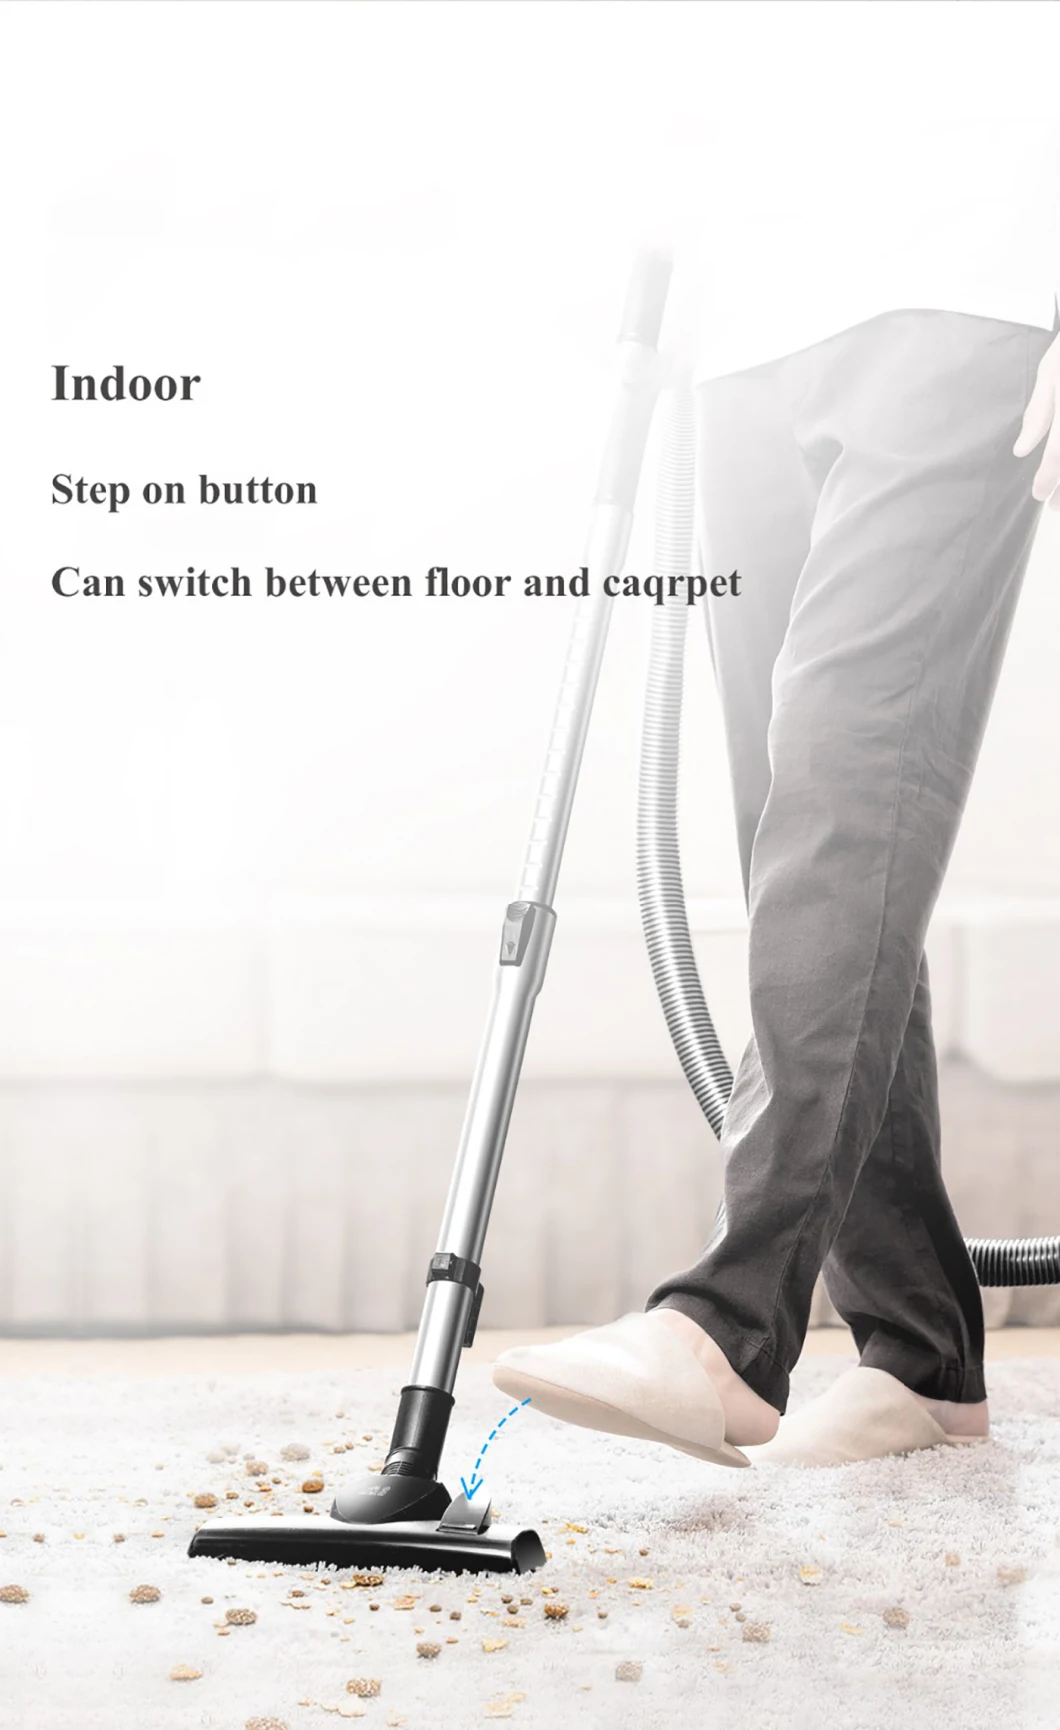 Most Popular Products of 2021 Cyclone Vacuum Cleaners, Upright Cordless Vacuum Cleaner